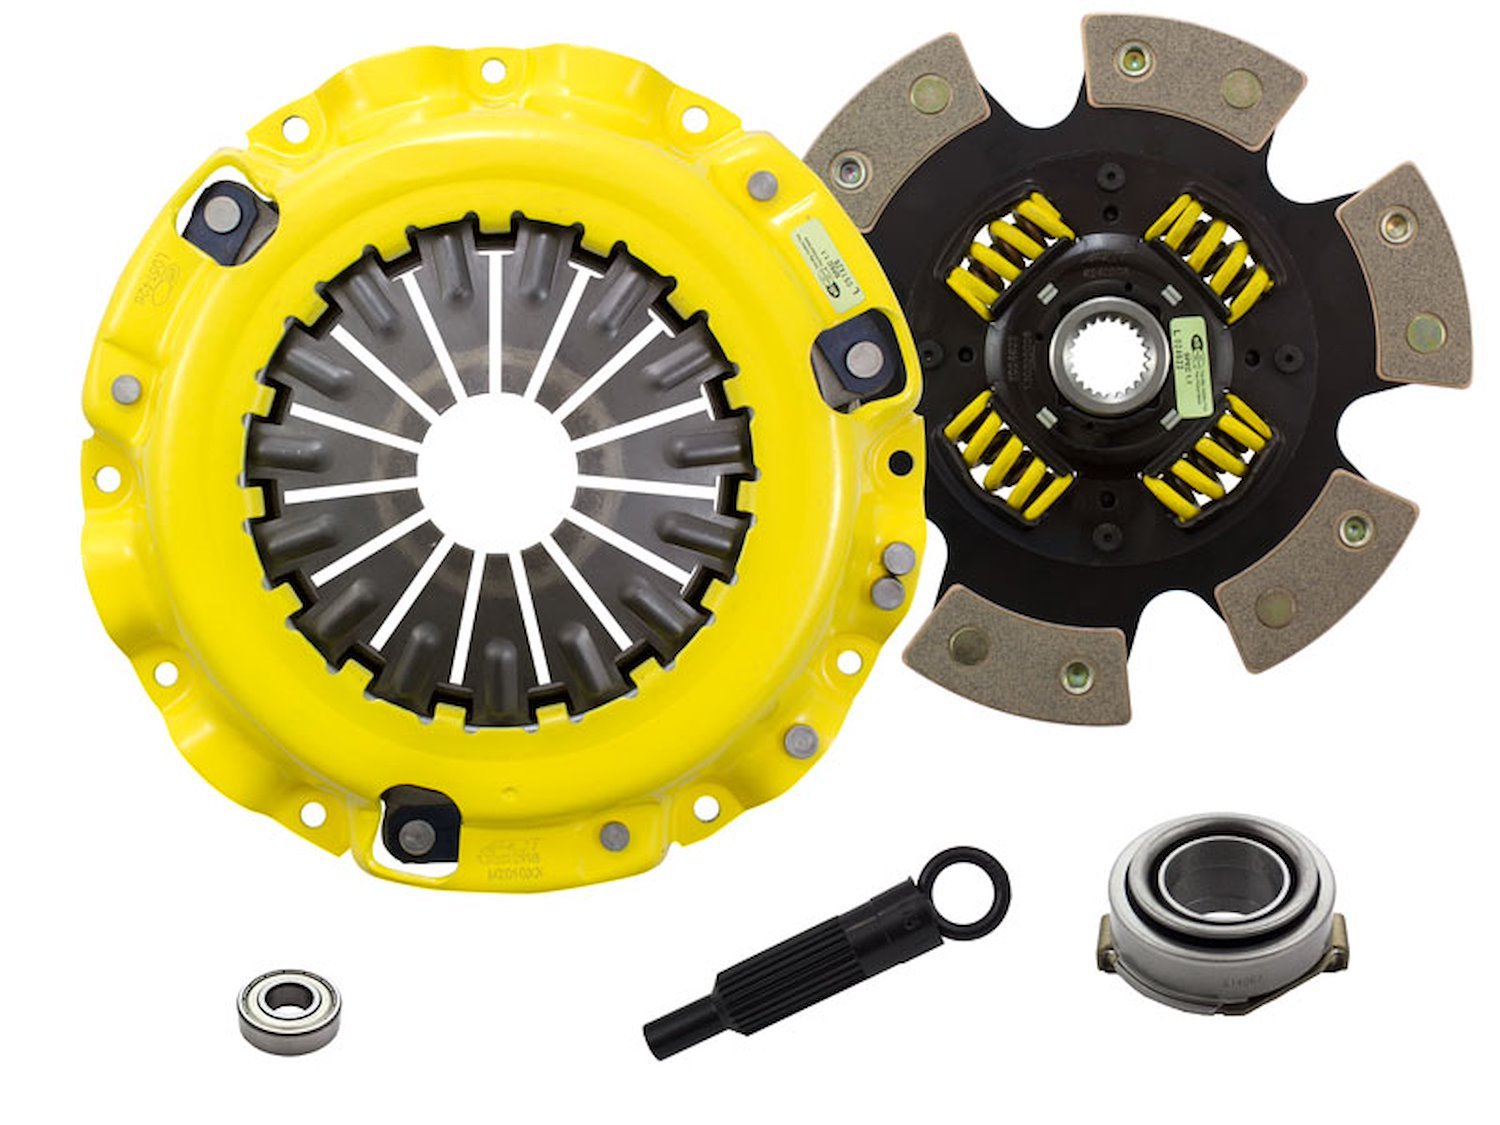 MaXX/Race Sprung 6-Pad Transmission Clutch Kit Fits Select